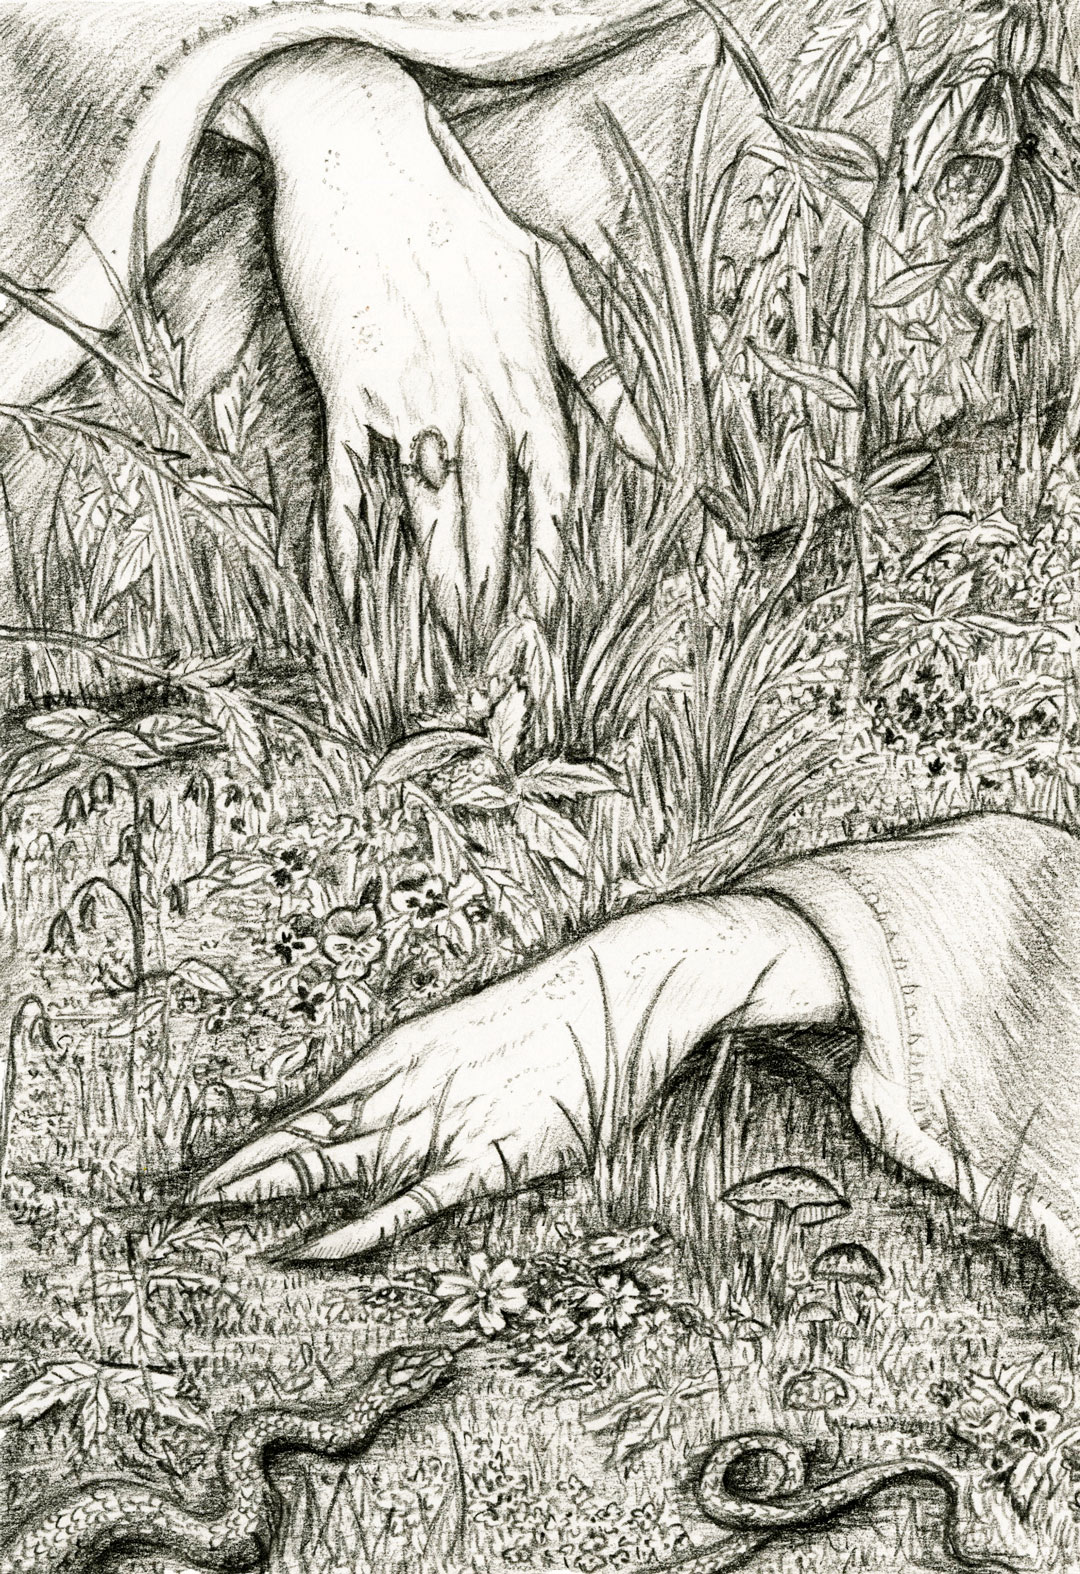 Black coloured pencil drawing on white cartridge paper. Depicts the hands of Queen Titania from A Midsummer Night's Dream amongst wild foliage as she is sung to sleep.